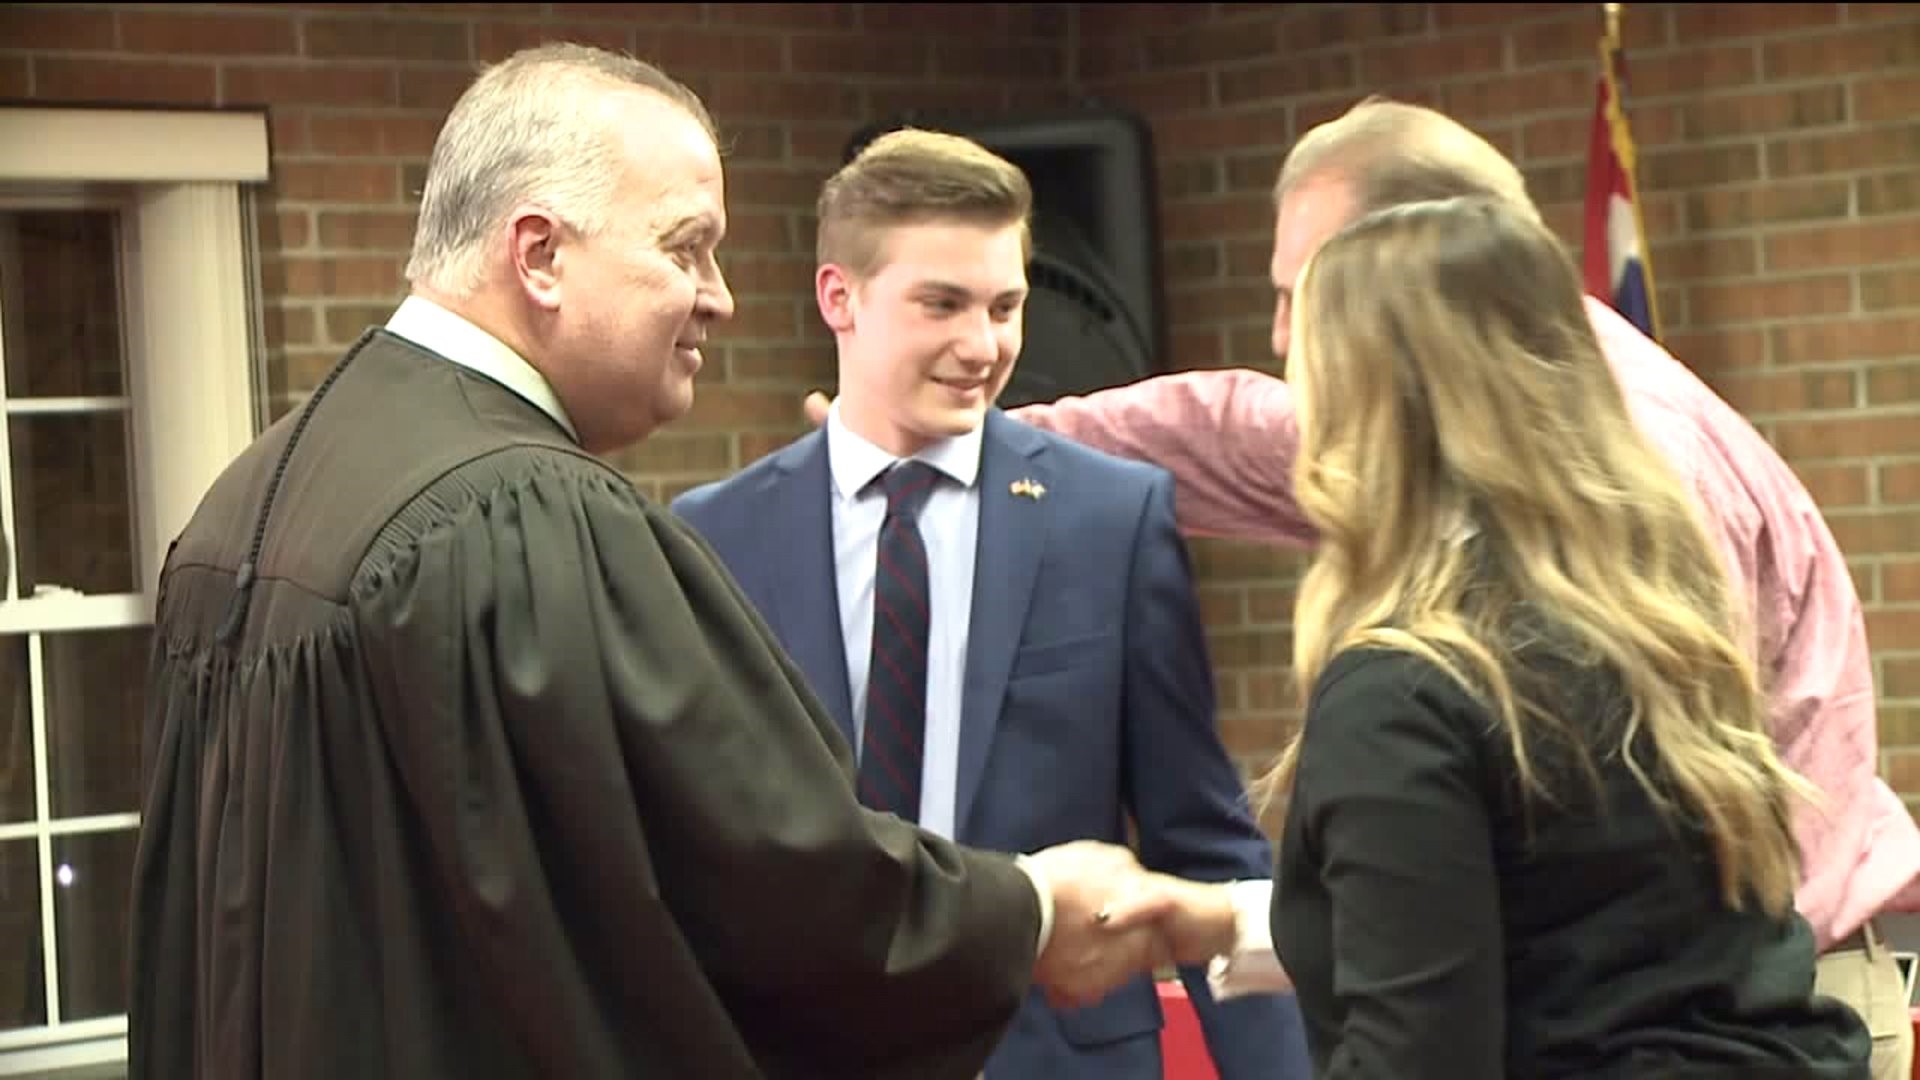 Teenager Sworn in as Plymouth Councilman